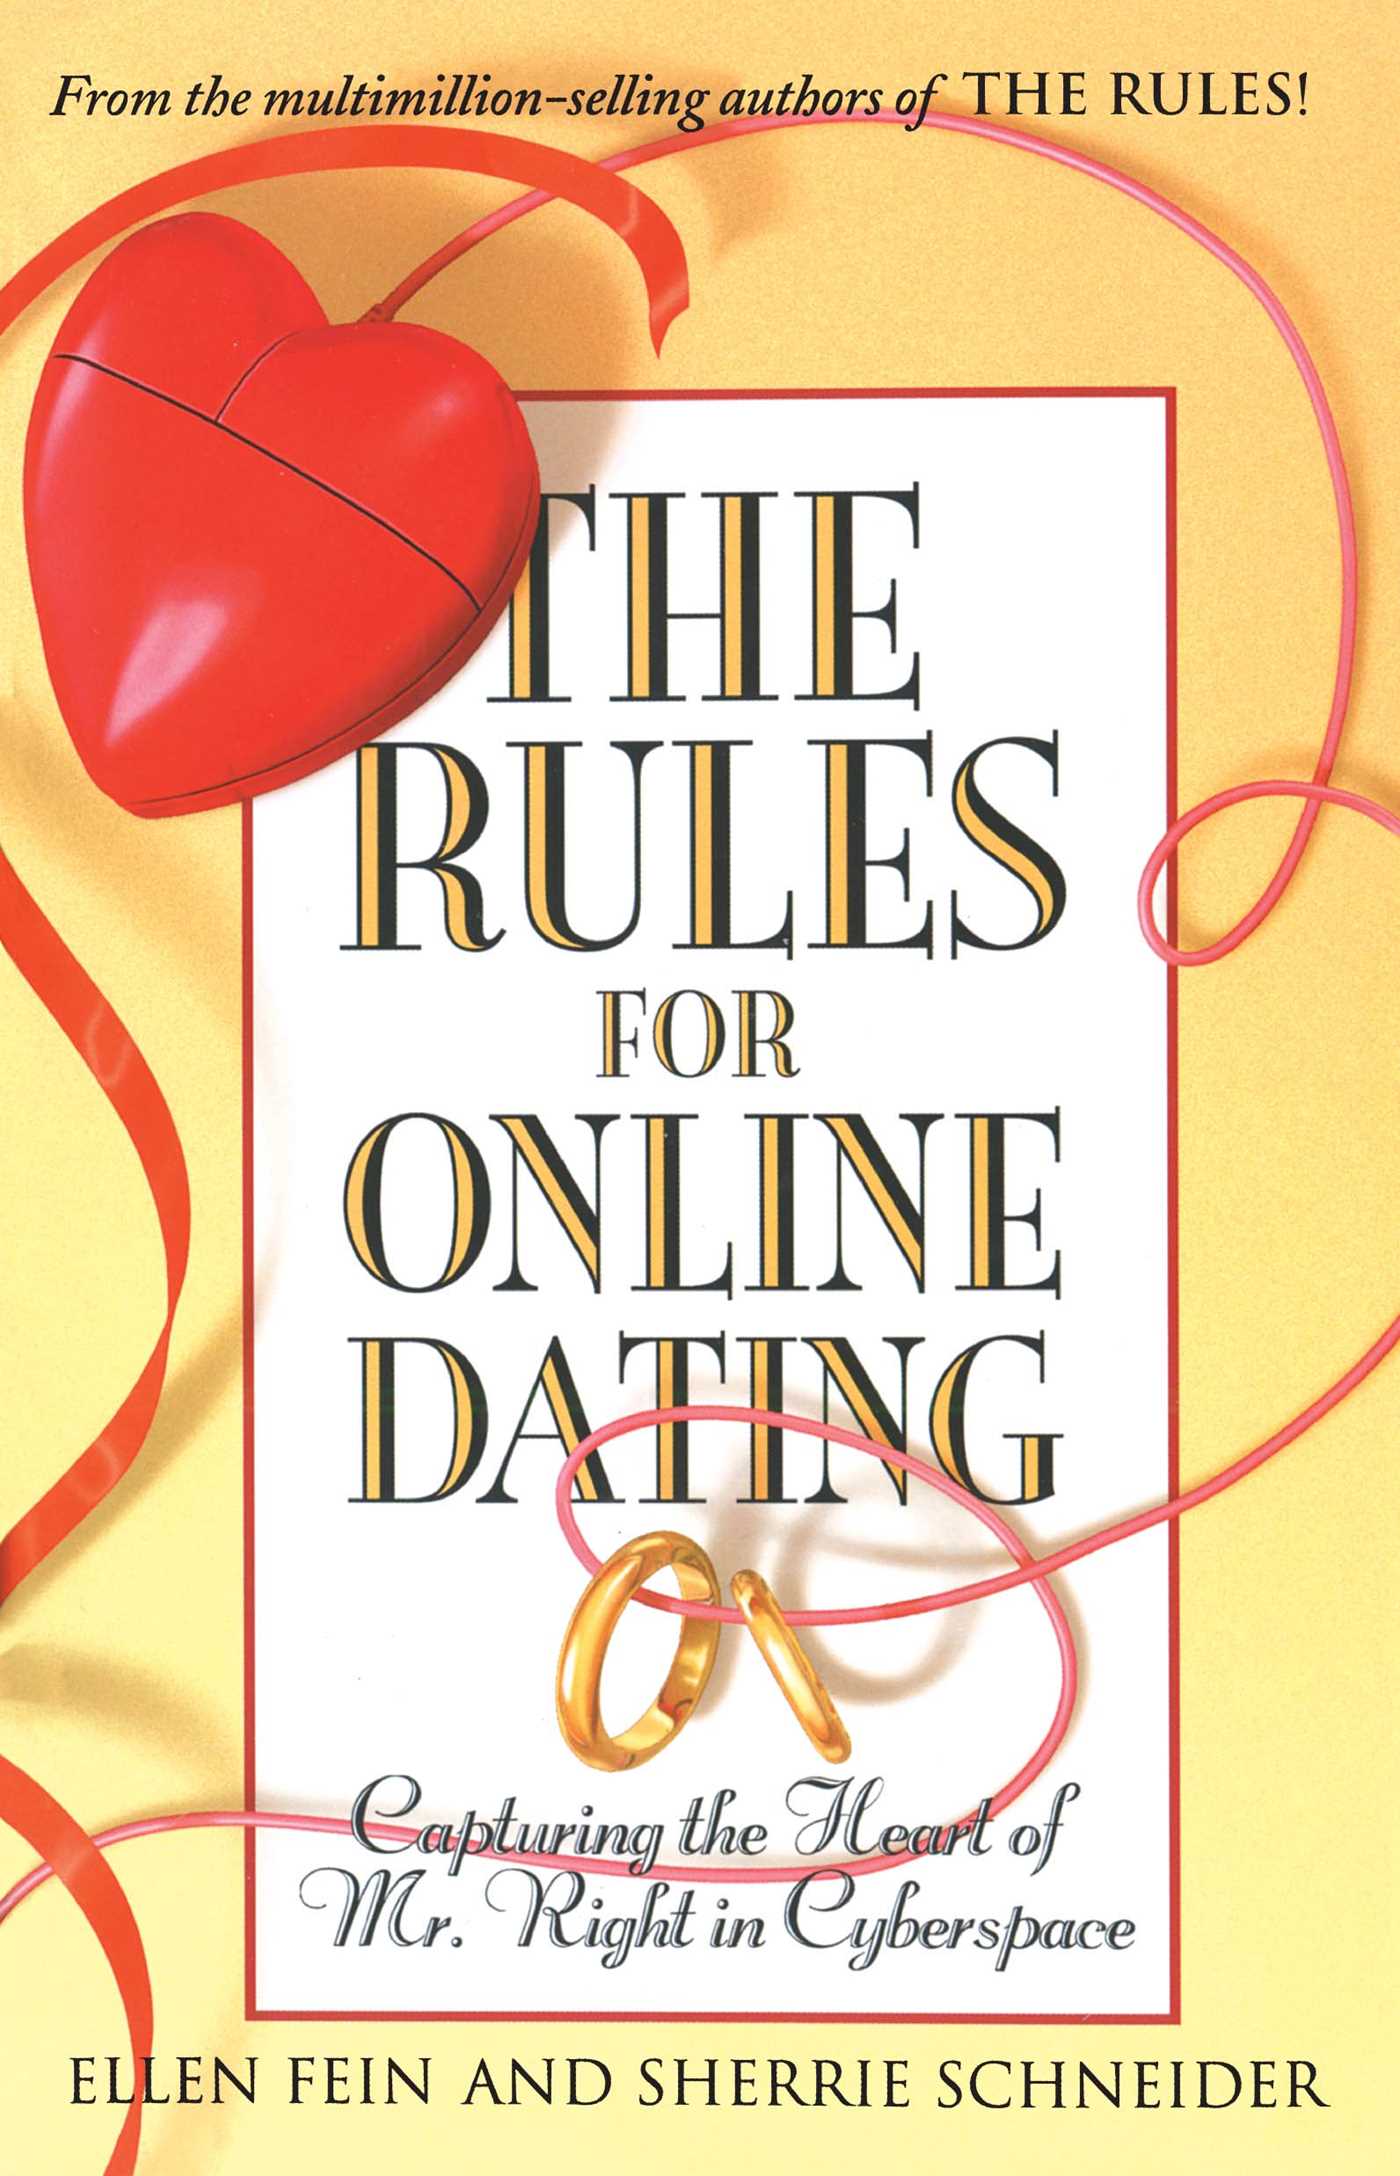 The Rules for Online Dating - 10-14.99